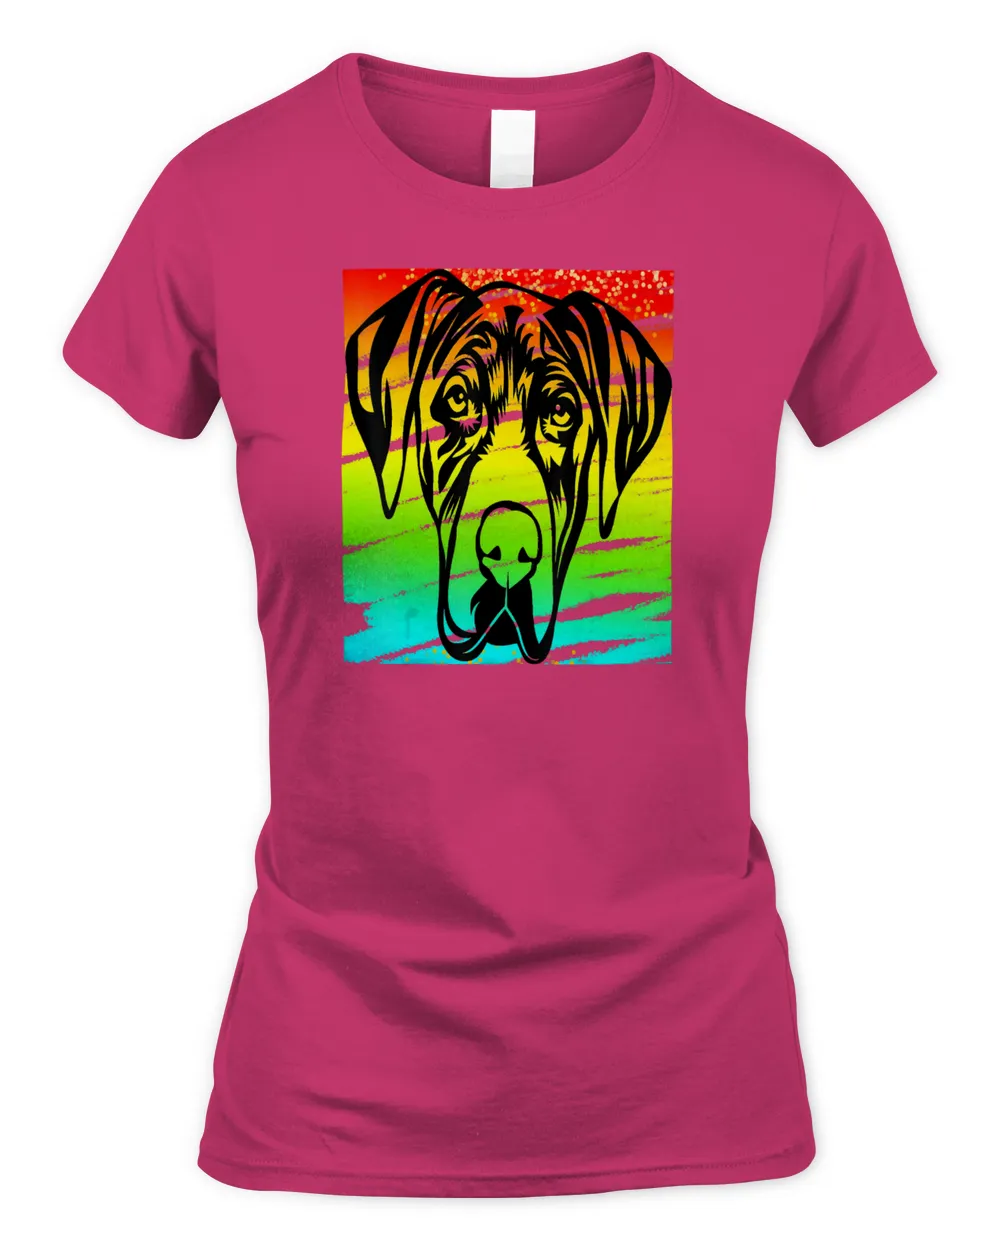 Cool Big Face Dog Tee Style Image of Great Dane T-Shirt